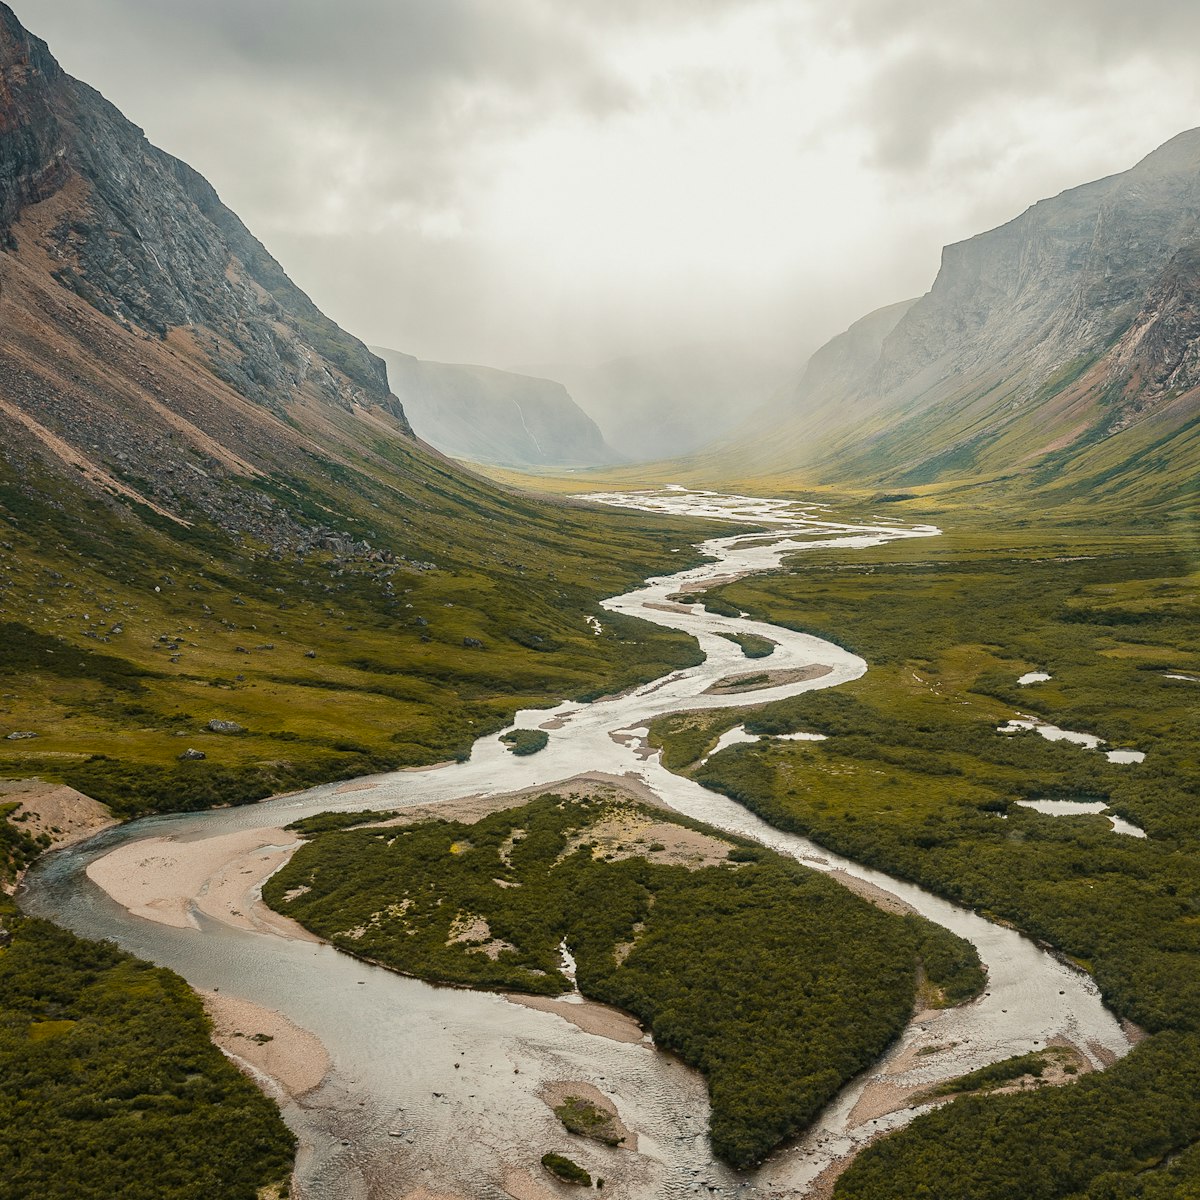 Torngat Mountains National Park in Newfoundland, Canada